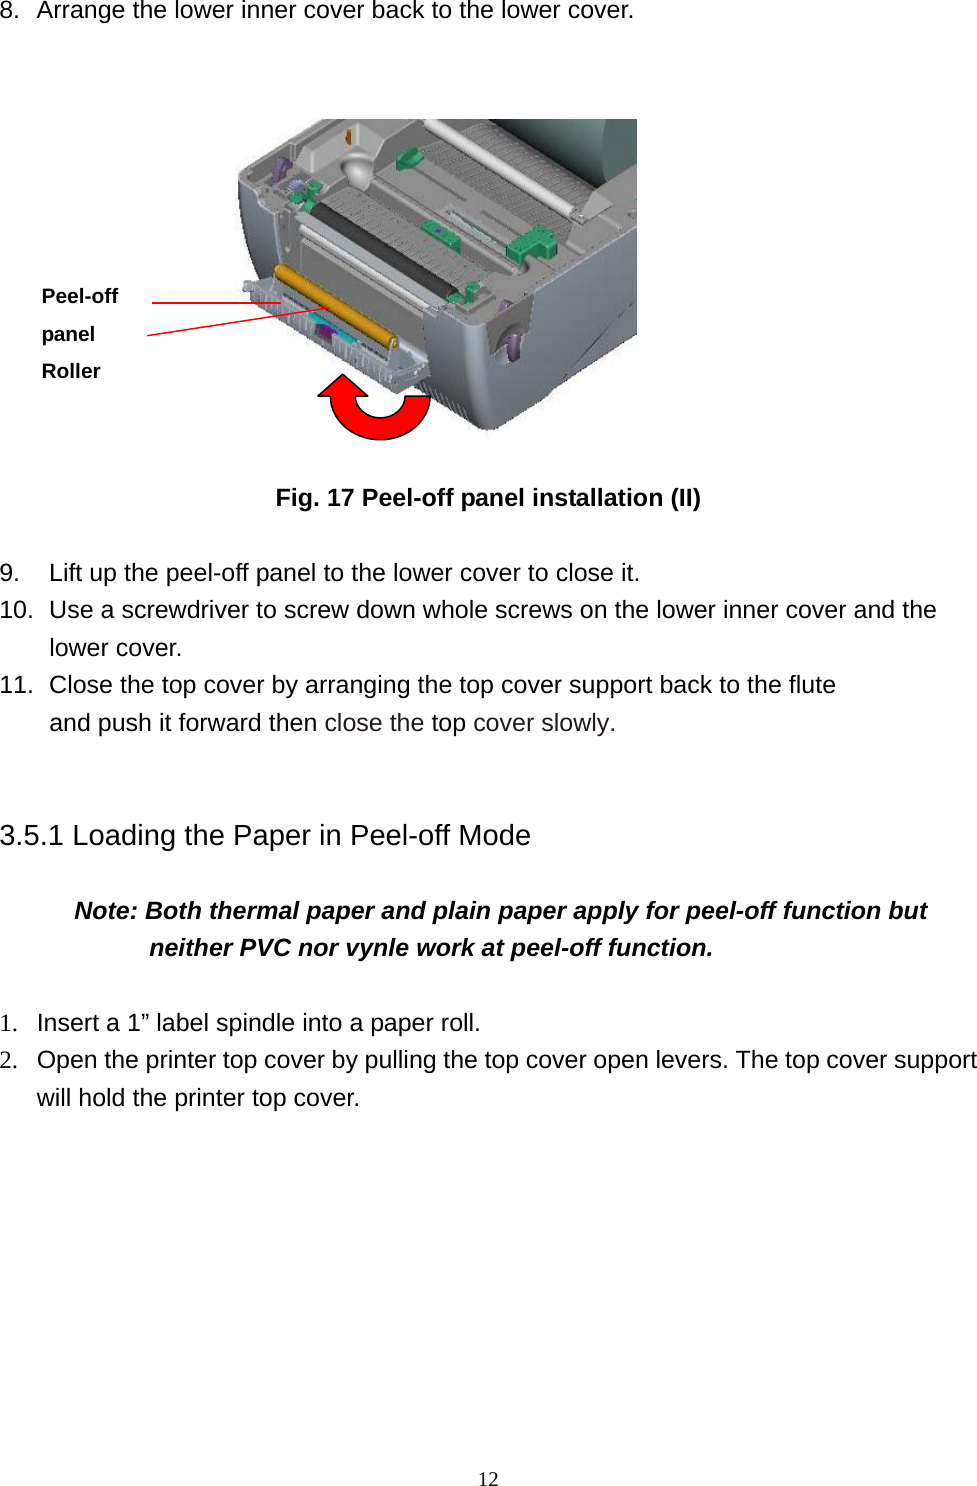  128.  Arrange the lower inner cover back to the lower cover.                 Fig. 17 Peel-off panel installation (II)  9.    Lift up the peel-off panel to the lower cover to close it. 10.  Use a screwdriver to screw down whole screws on the lower inner cover and the lower cover. 11.   Close the top cover by arranging the top cover support back to the flute     and push it forward then close the top cover slowly.  3.5.1 Loading the Paper in Peel-off Mode        Note: Both thermal paper and plain paper apply for peel-off function but neither PVC nor vynle work at peel-off function.      1.  Insert a 1” label spindle into a paper roll. 2.  Open the printer top cover by pulling the top cover open levers. The top cover support will hold the printer top cover.   Peel-off panel Roller 